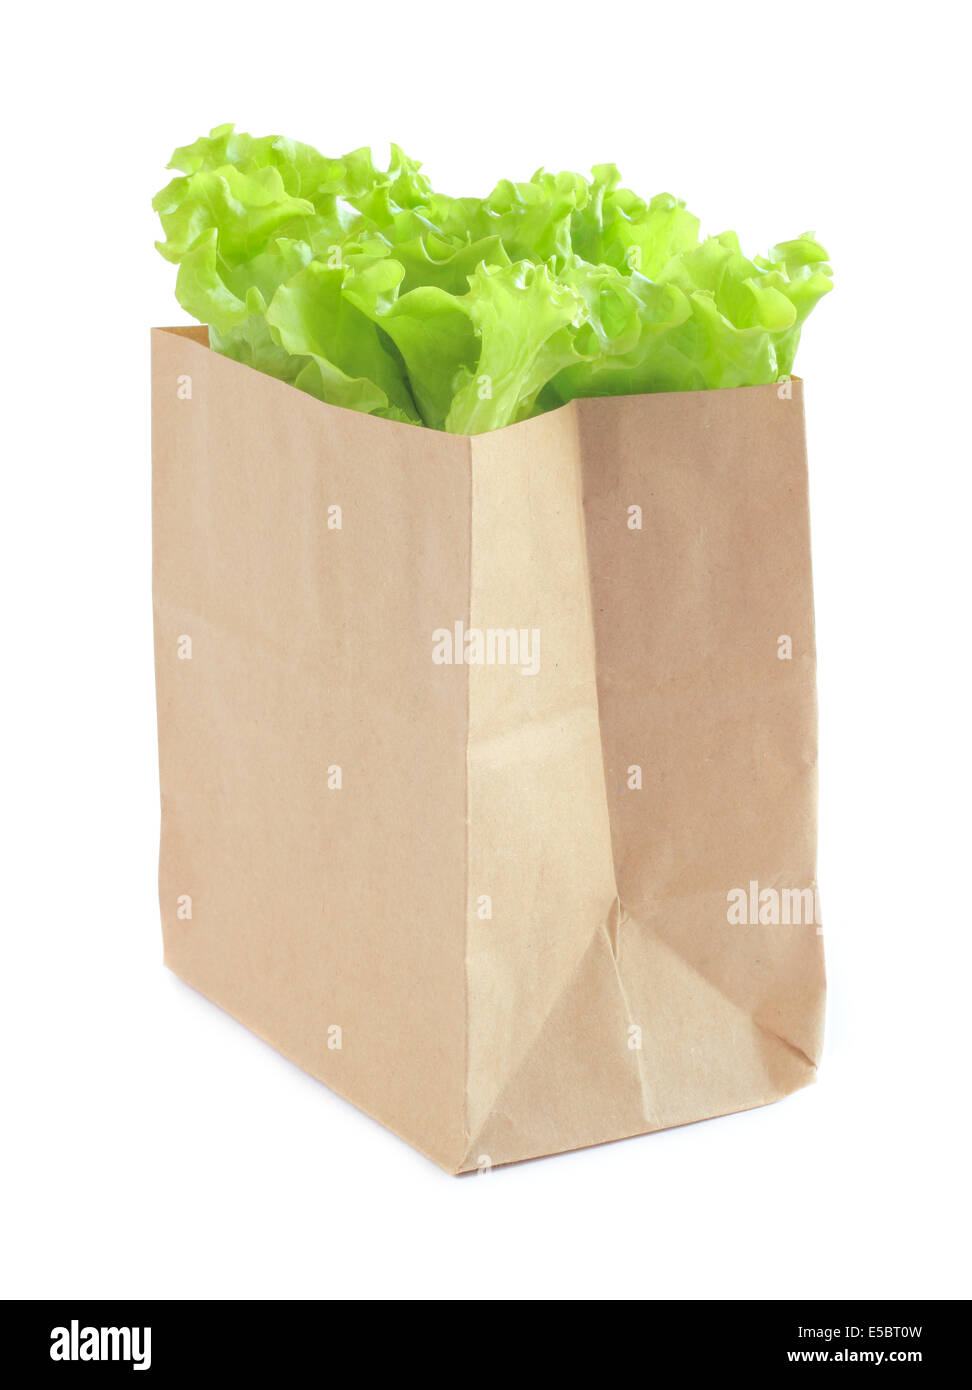 Grocery bag with green lettuce salad isolated on white background Stock Photo